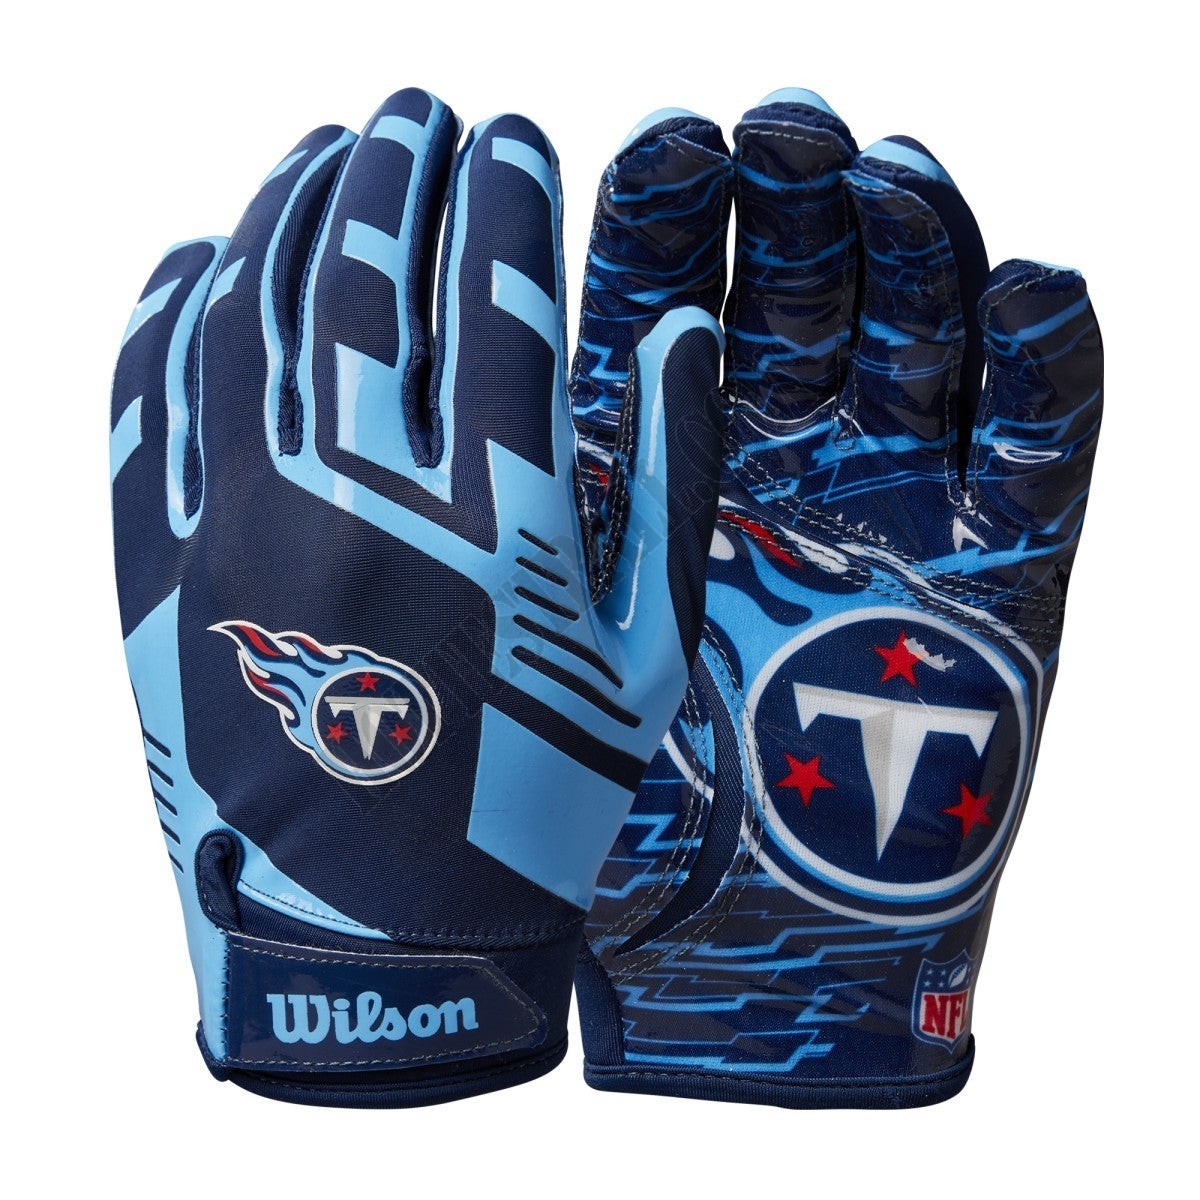 NFL Stretch Fit Receivers Gloves - Tennessee Titans ● Wilson Promotions - NFL Stretch Fit Receivers Gloves - Tennessee Titans ● Wilson Promotions